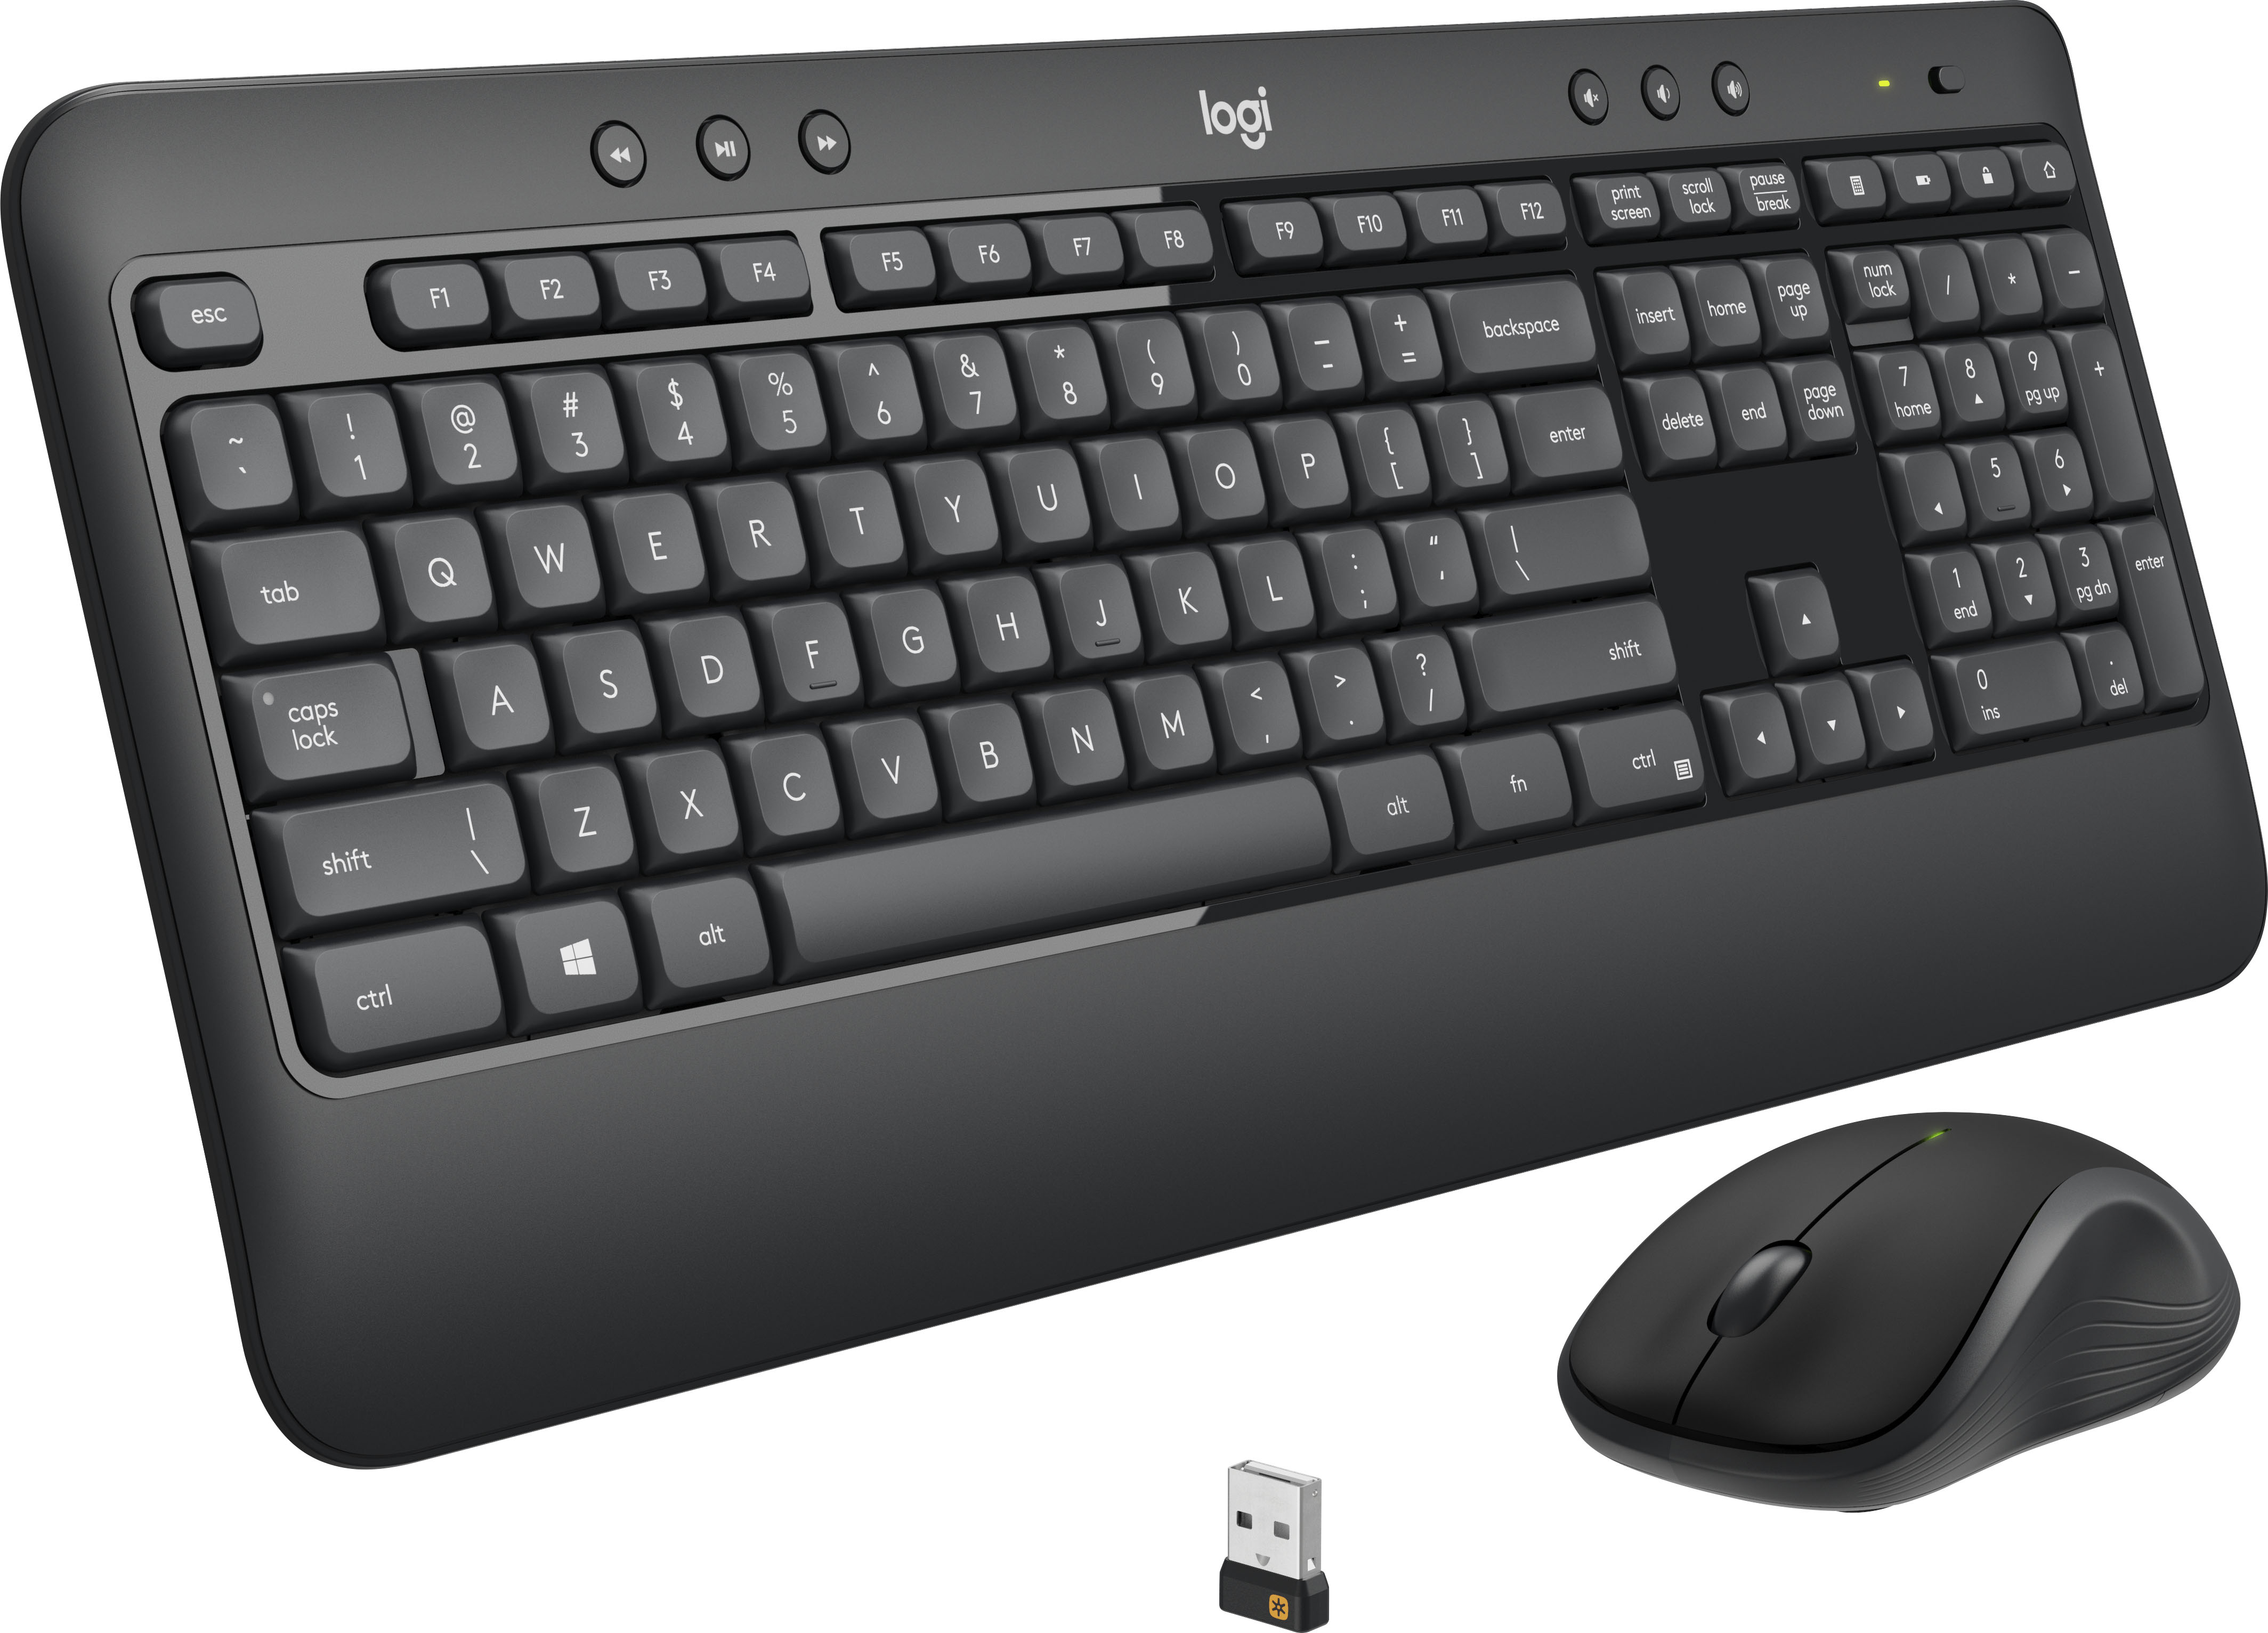 Logitech Combo PC - Wireless Keyboard Advanced Full-size and Membrane 920-008671 Mouse Black Best for Buy MK540